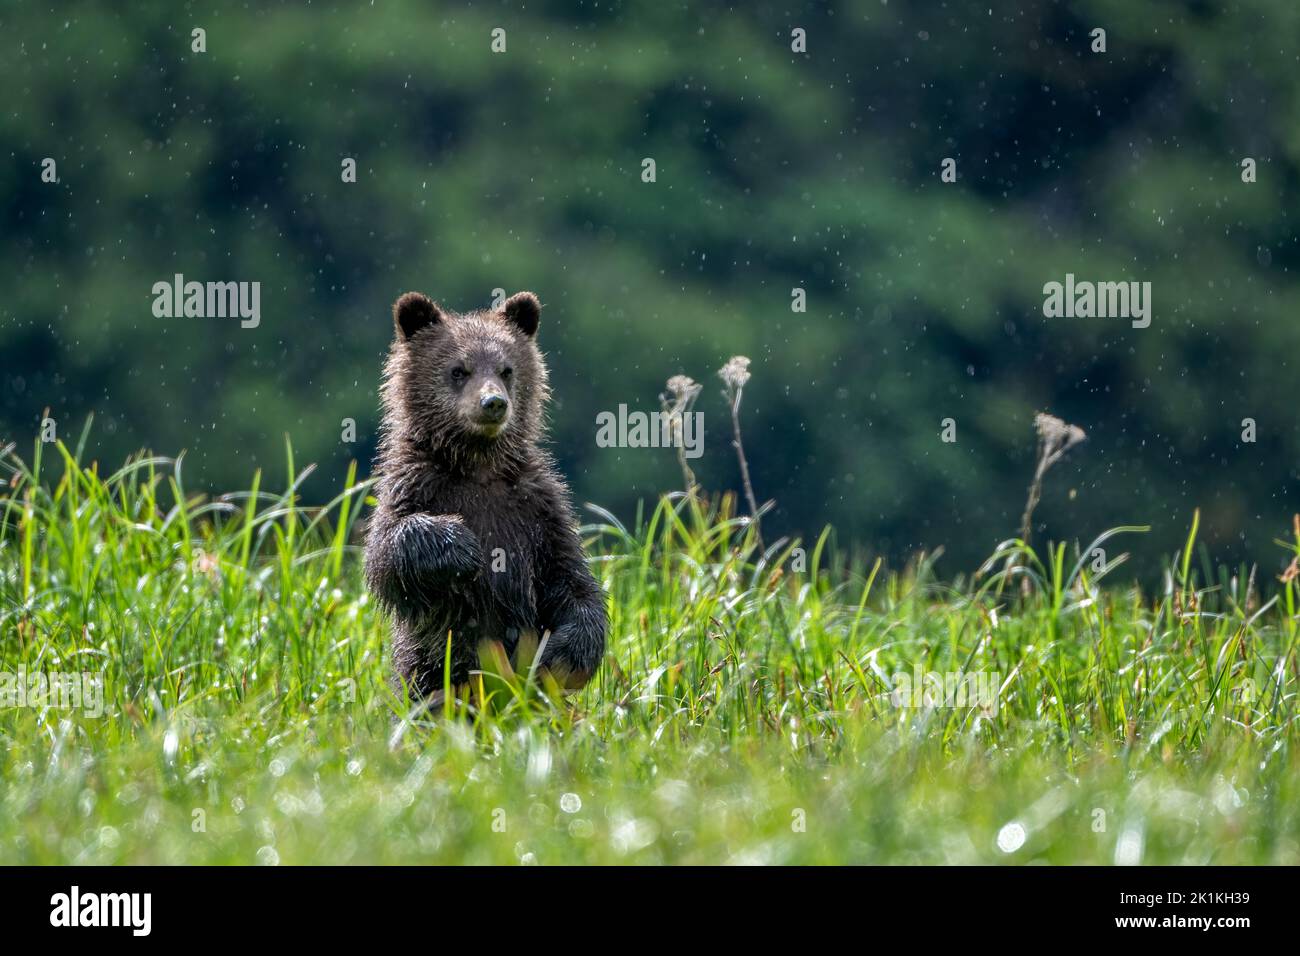 A black grizzly bear cub stands in tall sedge grass in British Colombia's Great Bear Rainforest. Stock Photo